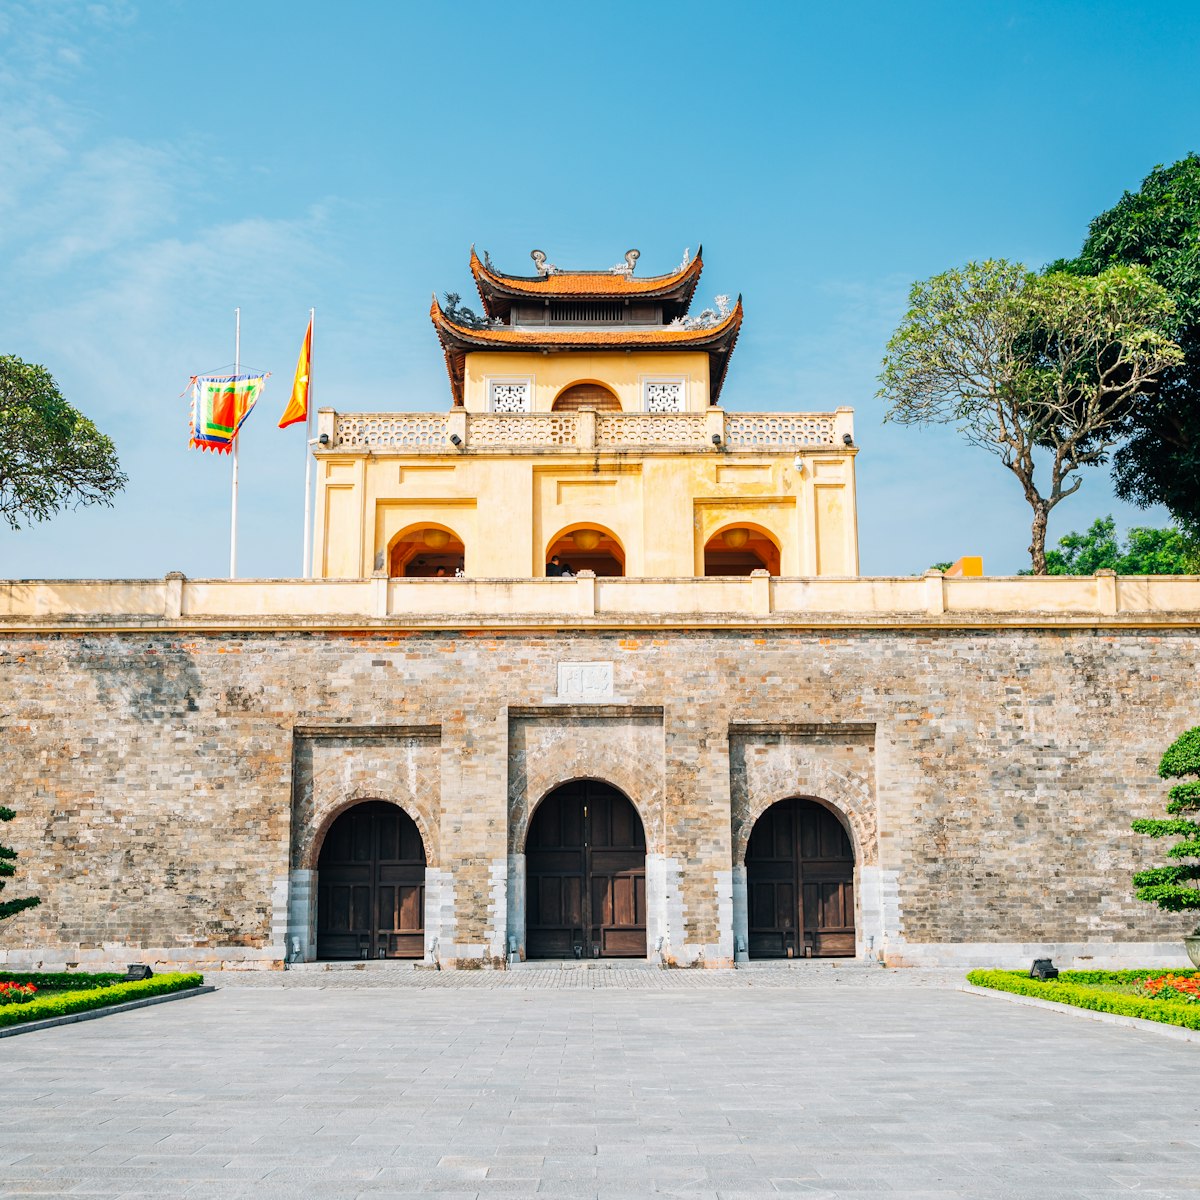 Thang Long Imperial City in Hanoi, Vietnam
1059003782
world, view, vietnamese, traditional, thang, site, sightseeing, royal, park, outdoor, national, mon, landmark, king, imperial, heritage, feudal, famous, doan, culture, cultural, citadel, central, building, beautiful, attraction